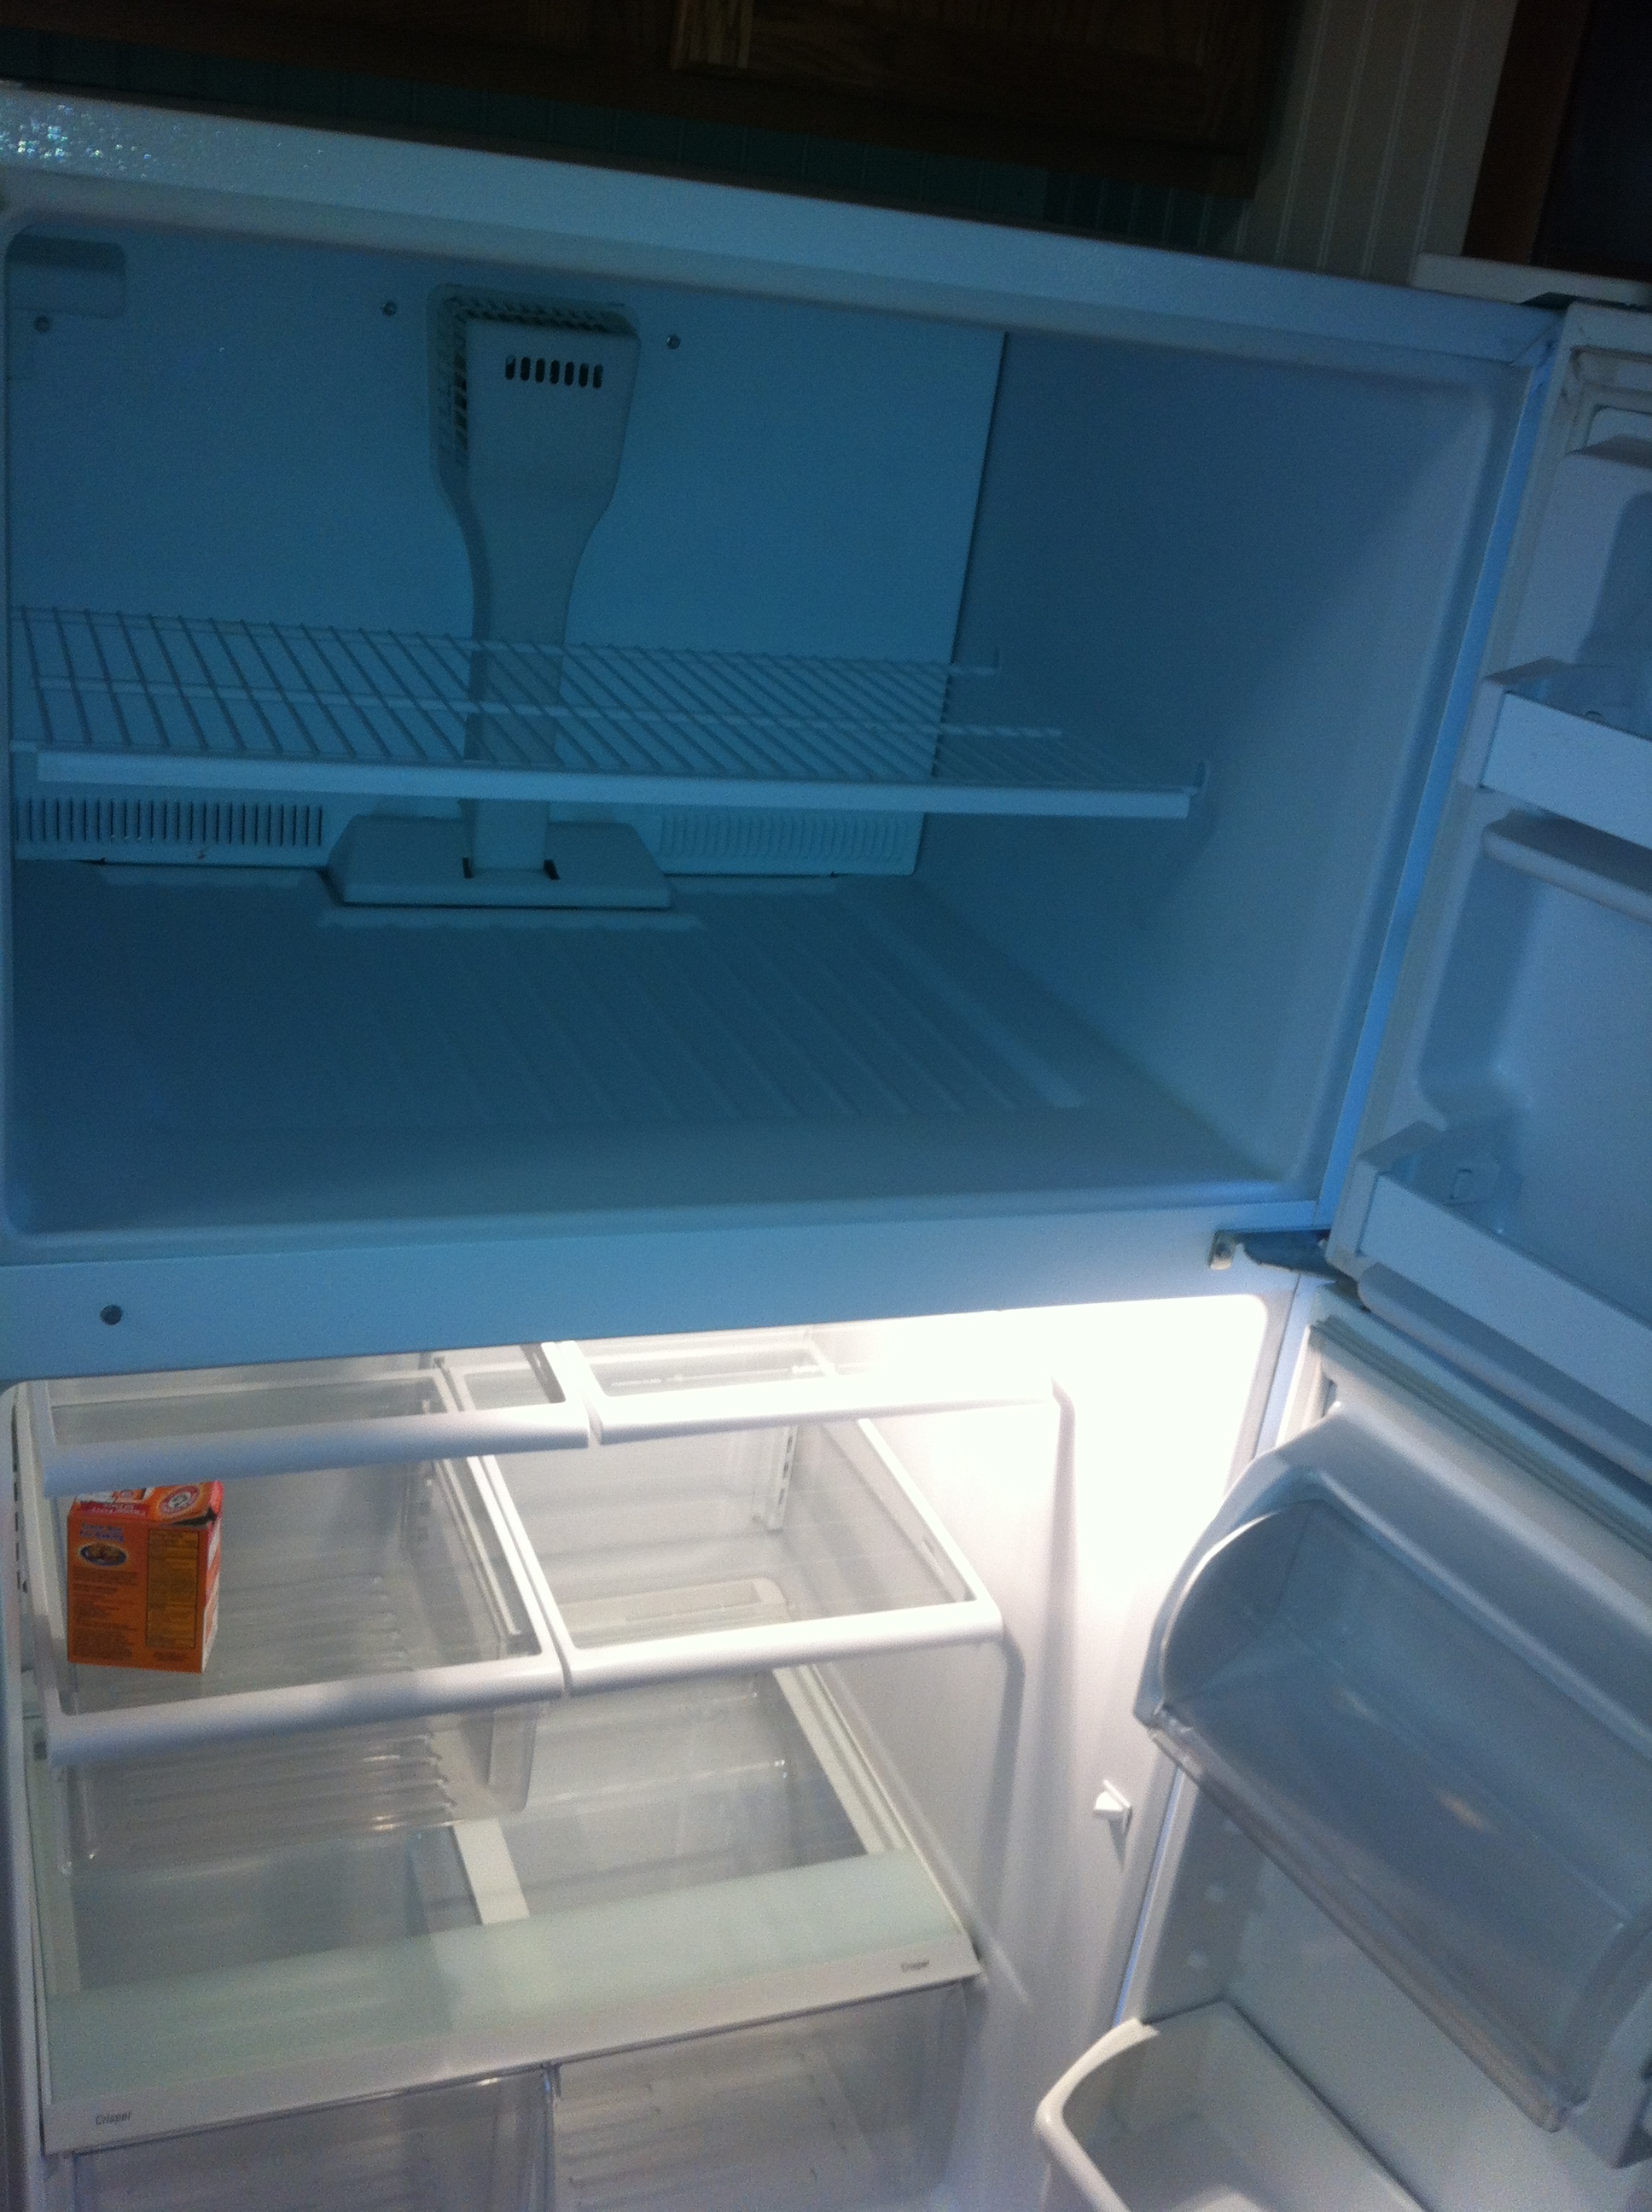  Your property’s fridge has never been this clean! 